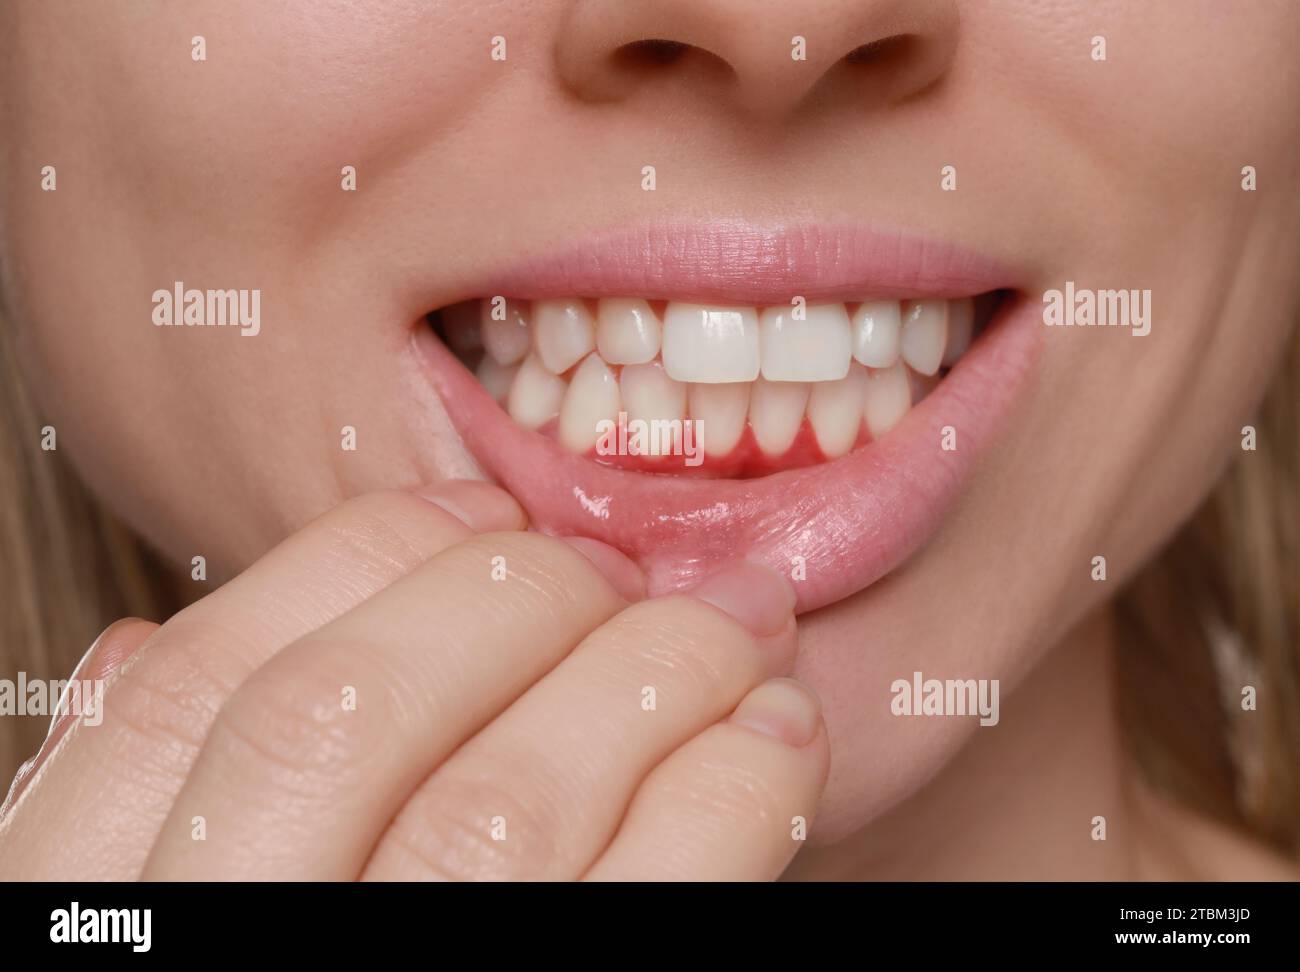 Woman showing inflamed gum, closeup. Oral cavity health Stock Photo